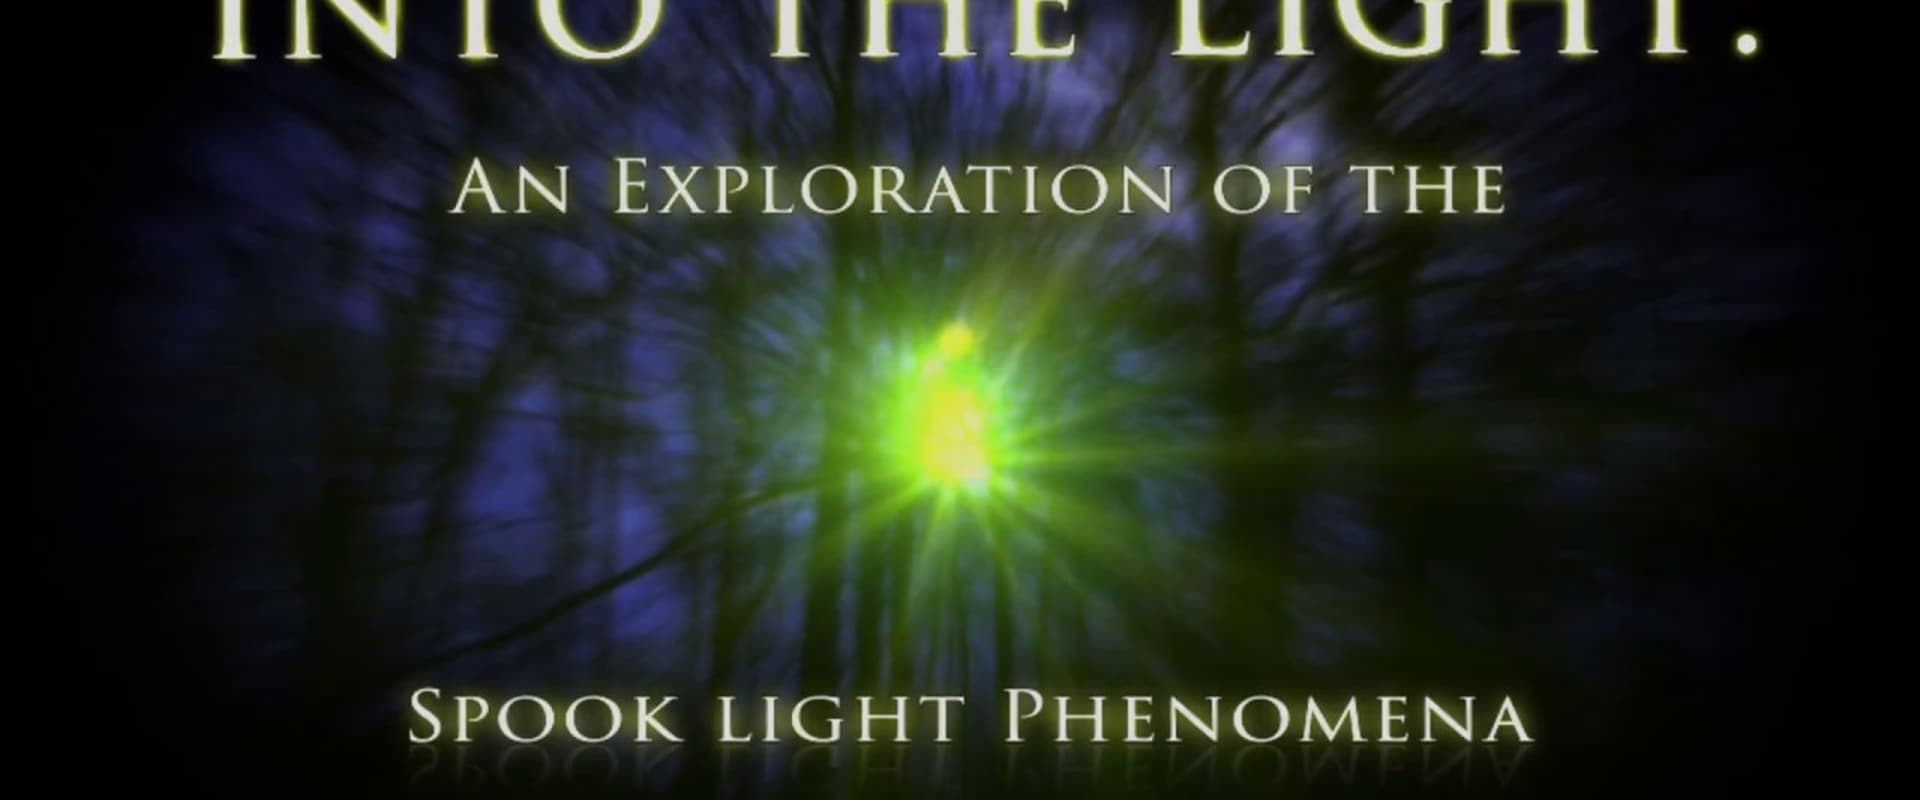 Into The Light: An Exploration of the Spook Light Phenomena